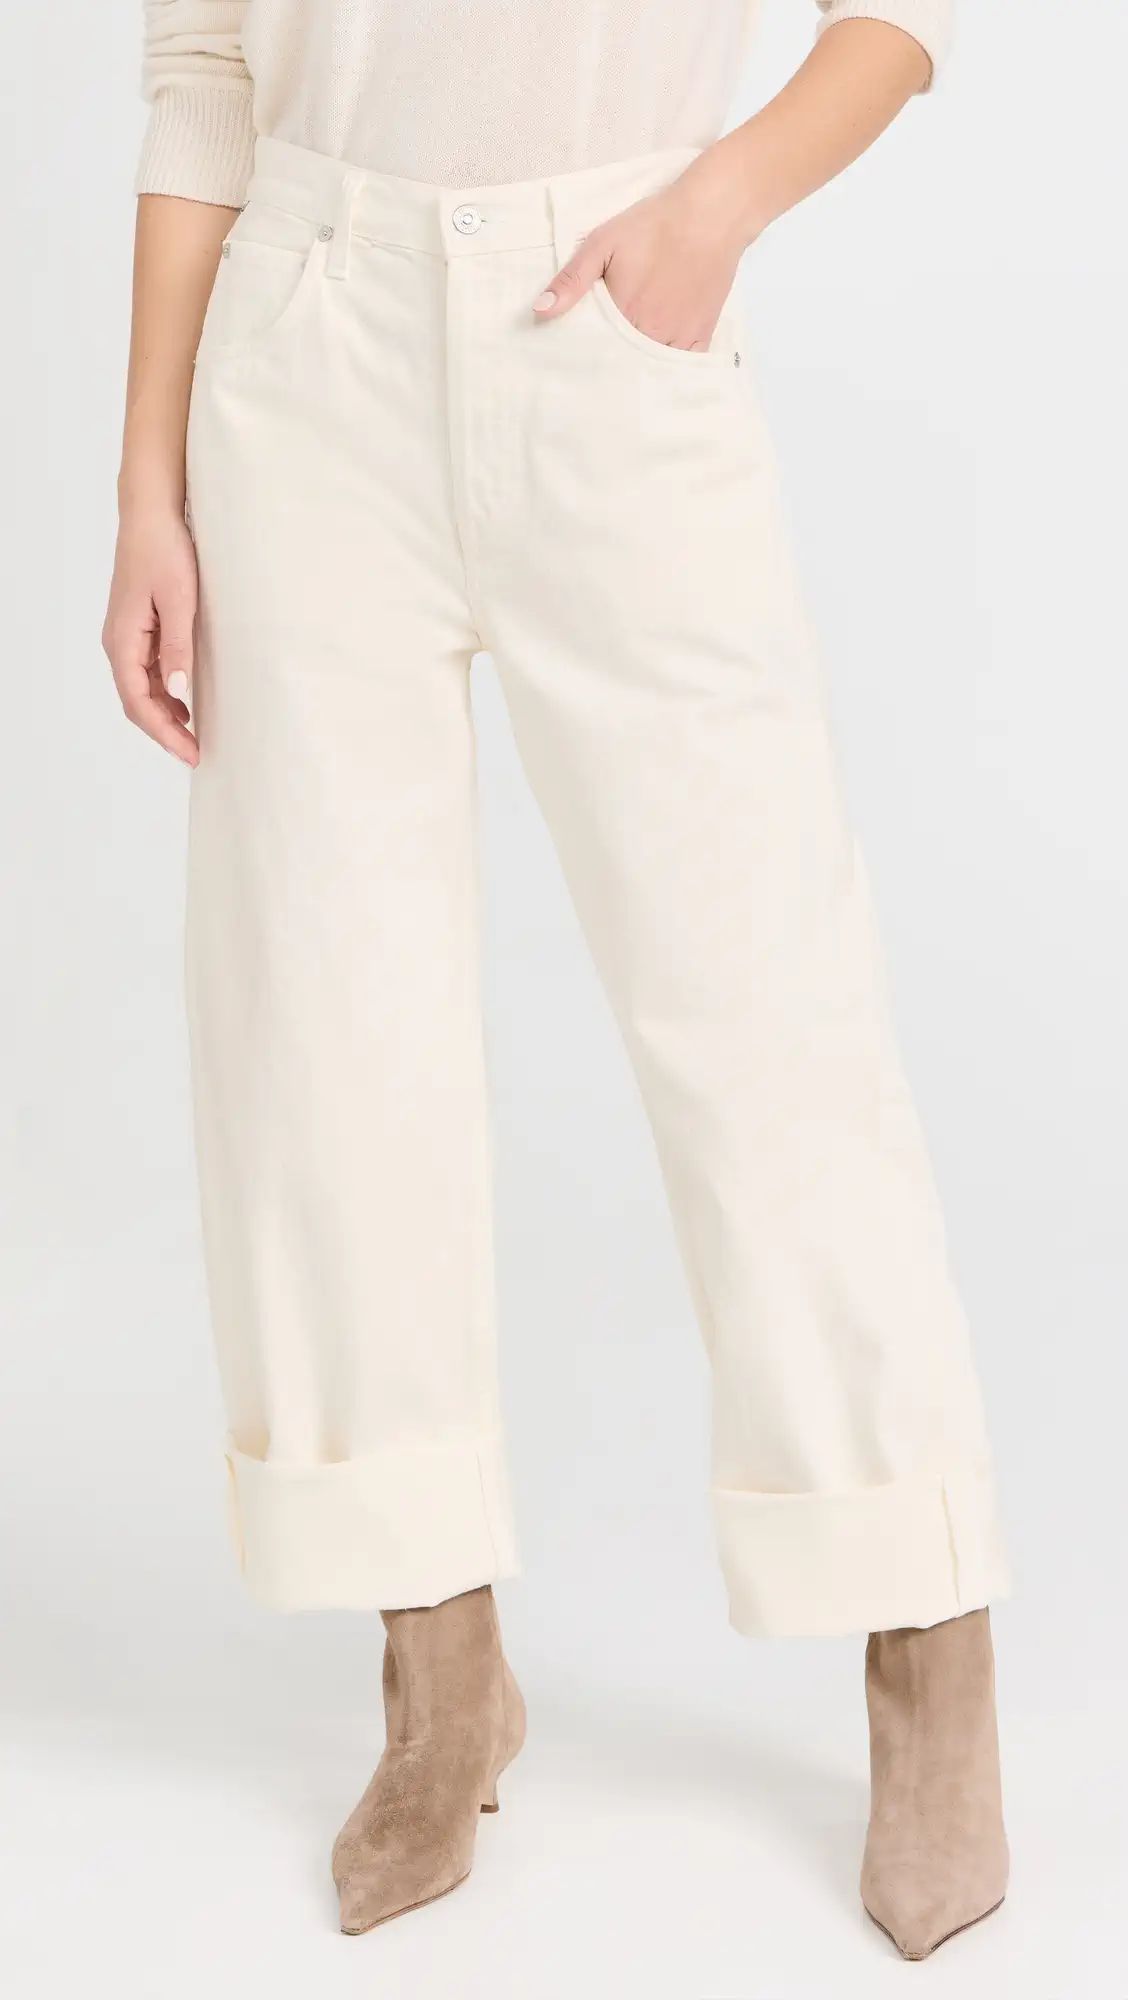 Citizens of Humanity Ayla Baggy Cuffed Crop Jeans | Shopbop | Shopbop